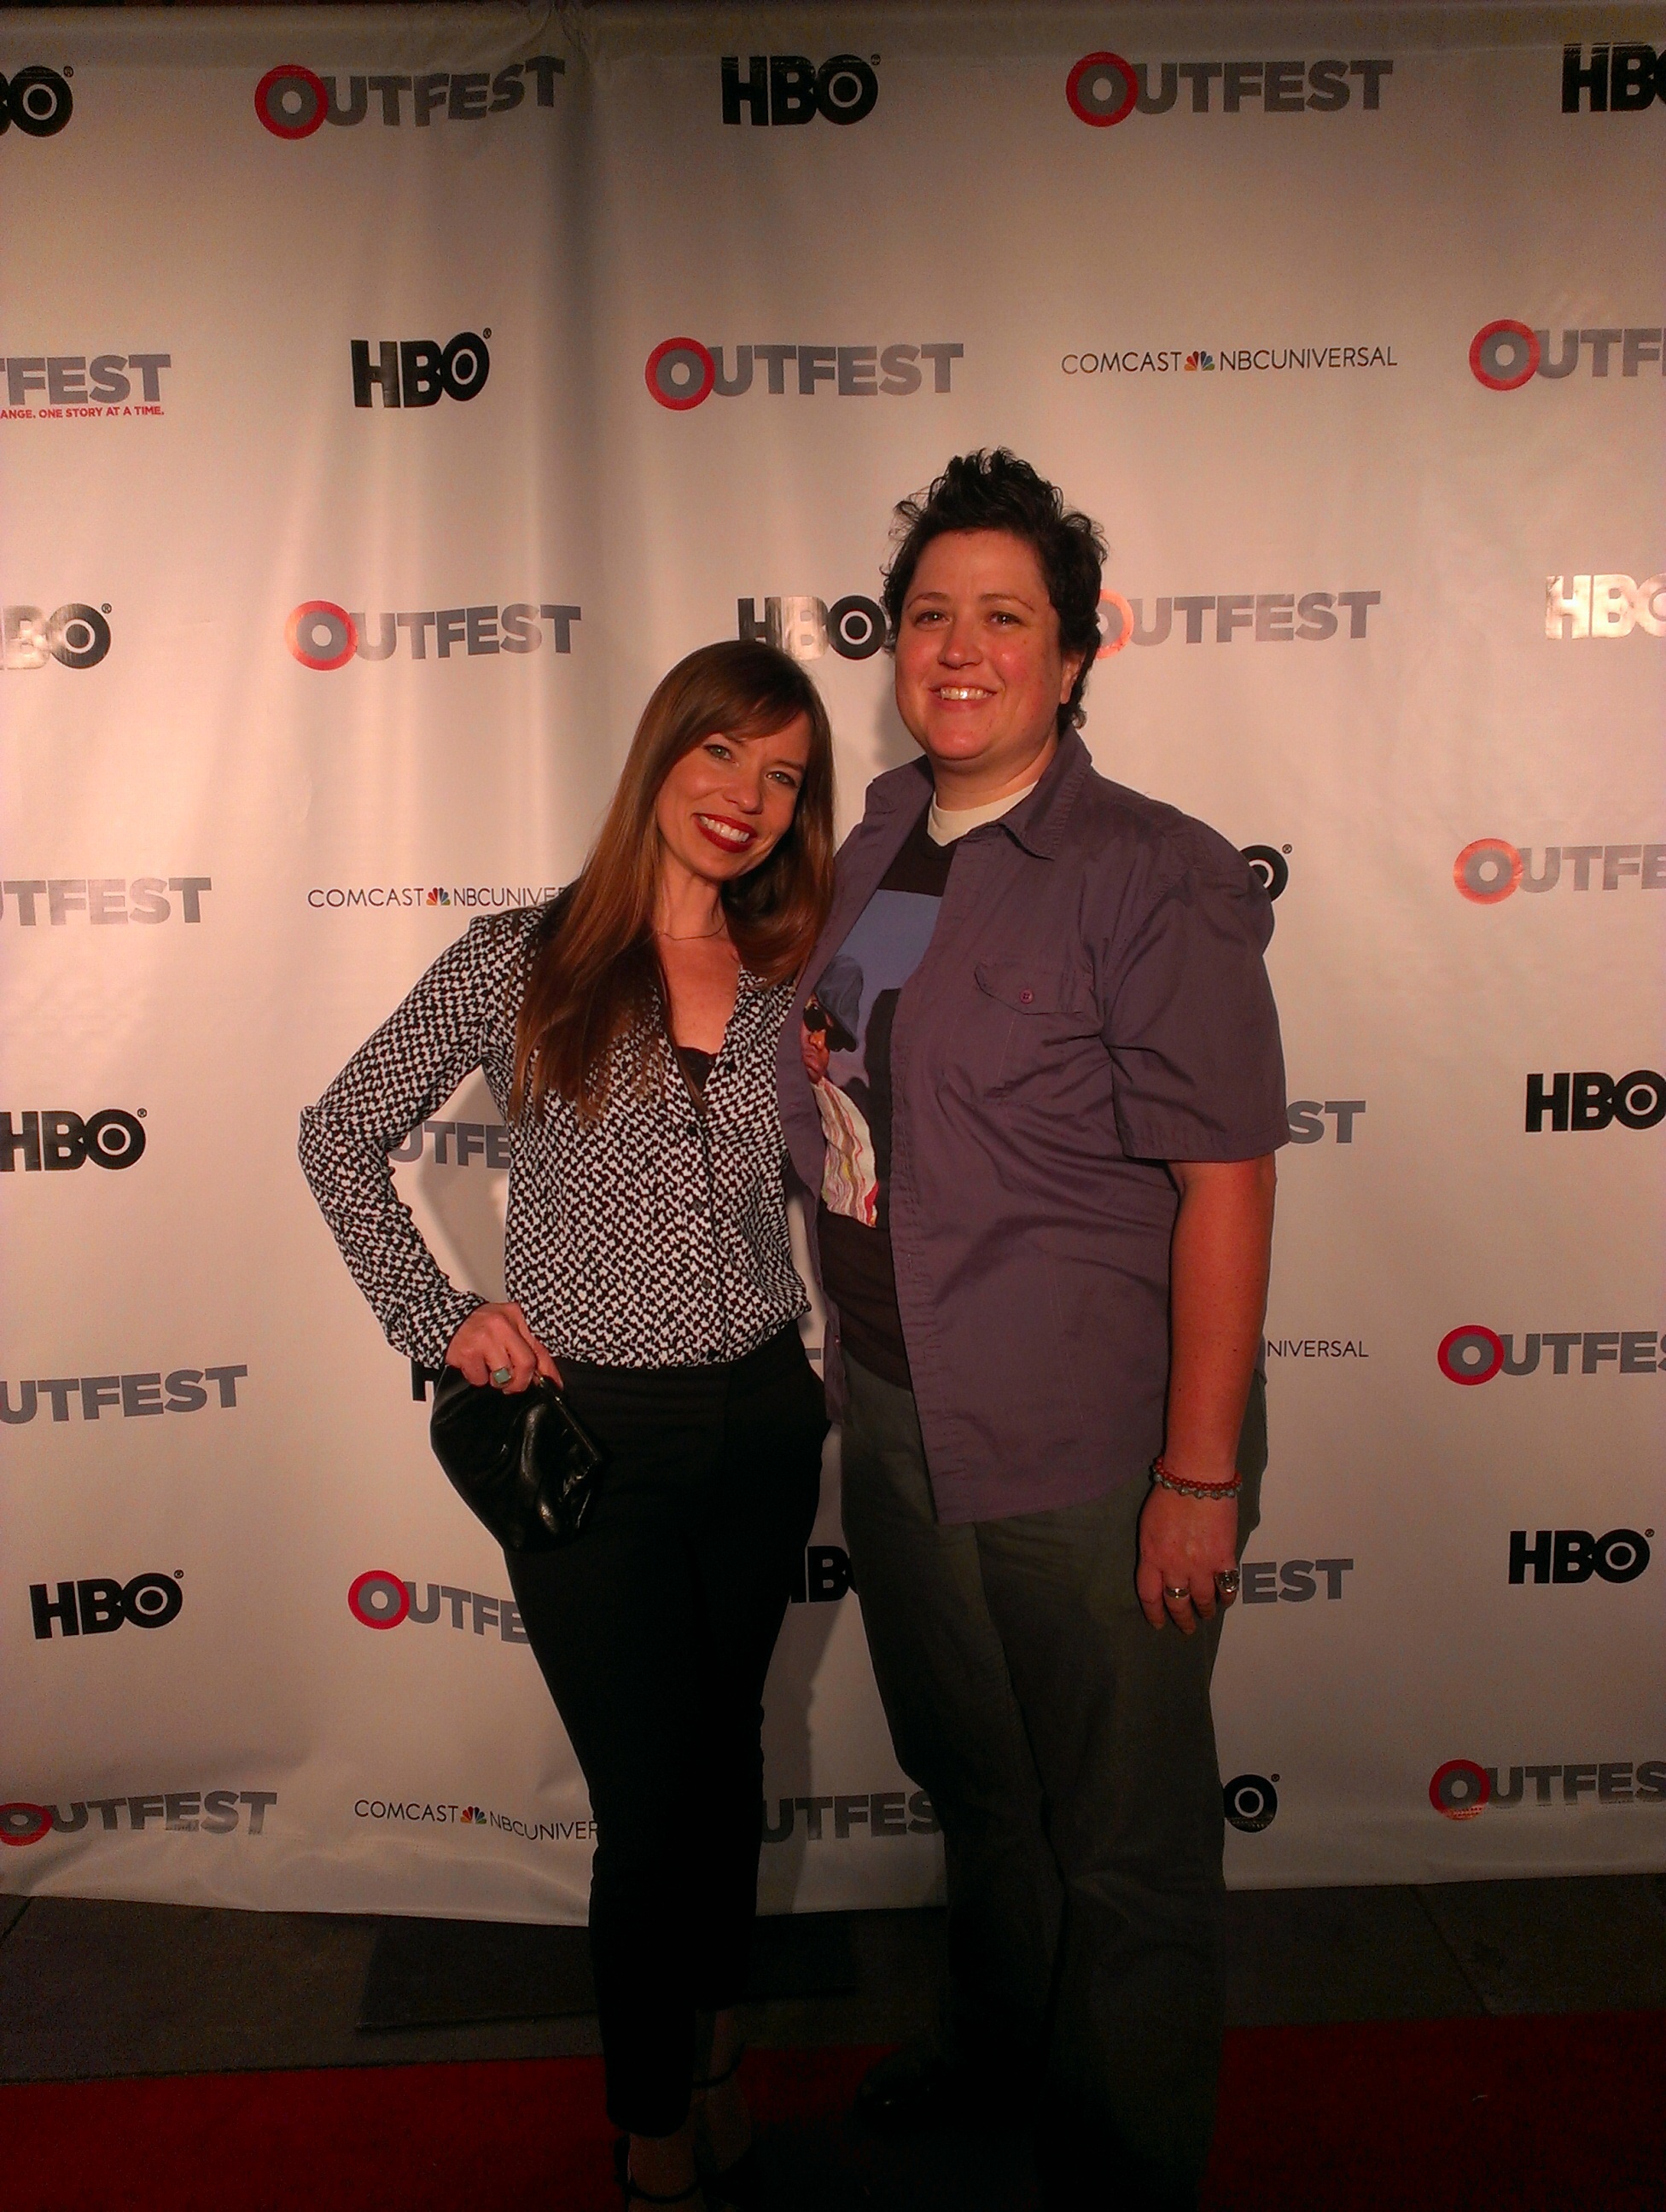 Outfest with the amazing Actress, Jessica Etheridge.